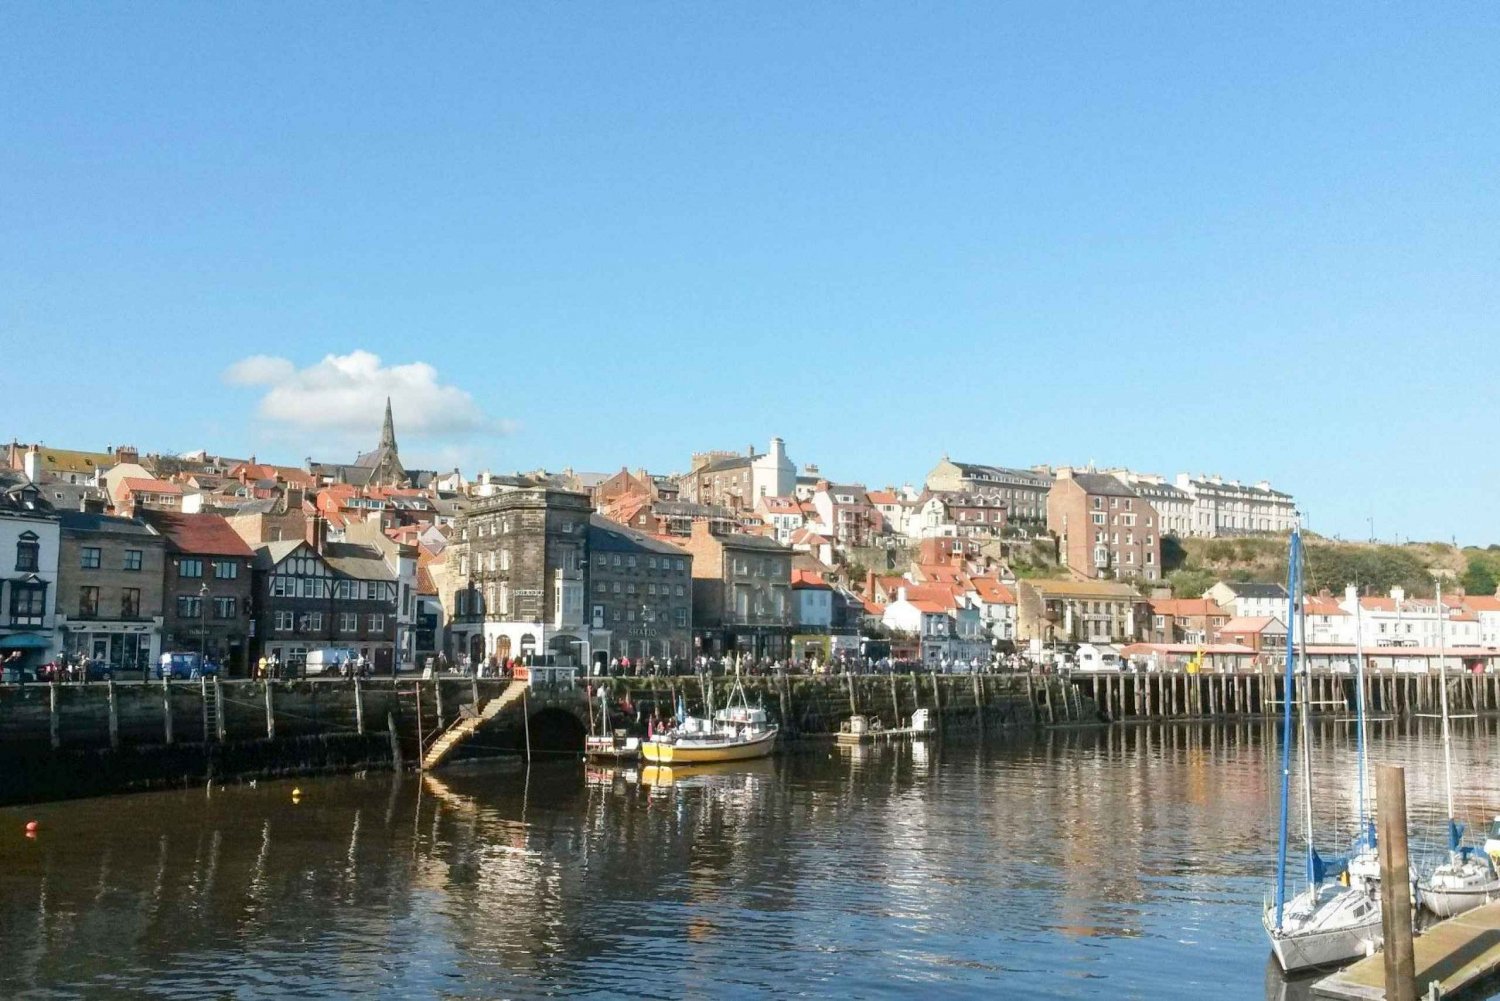 North York Moors and Whitby Tour from York